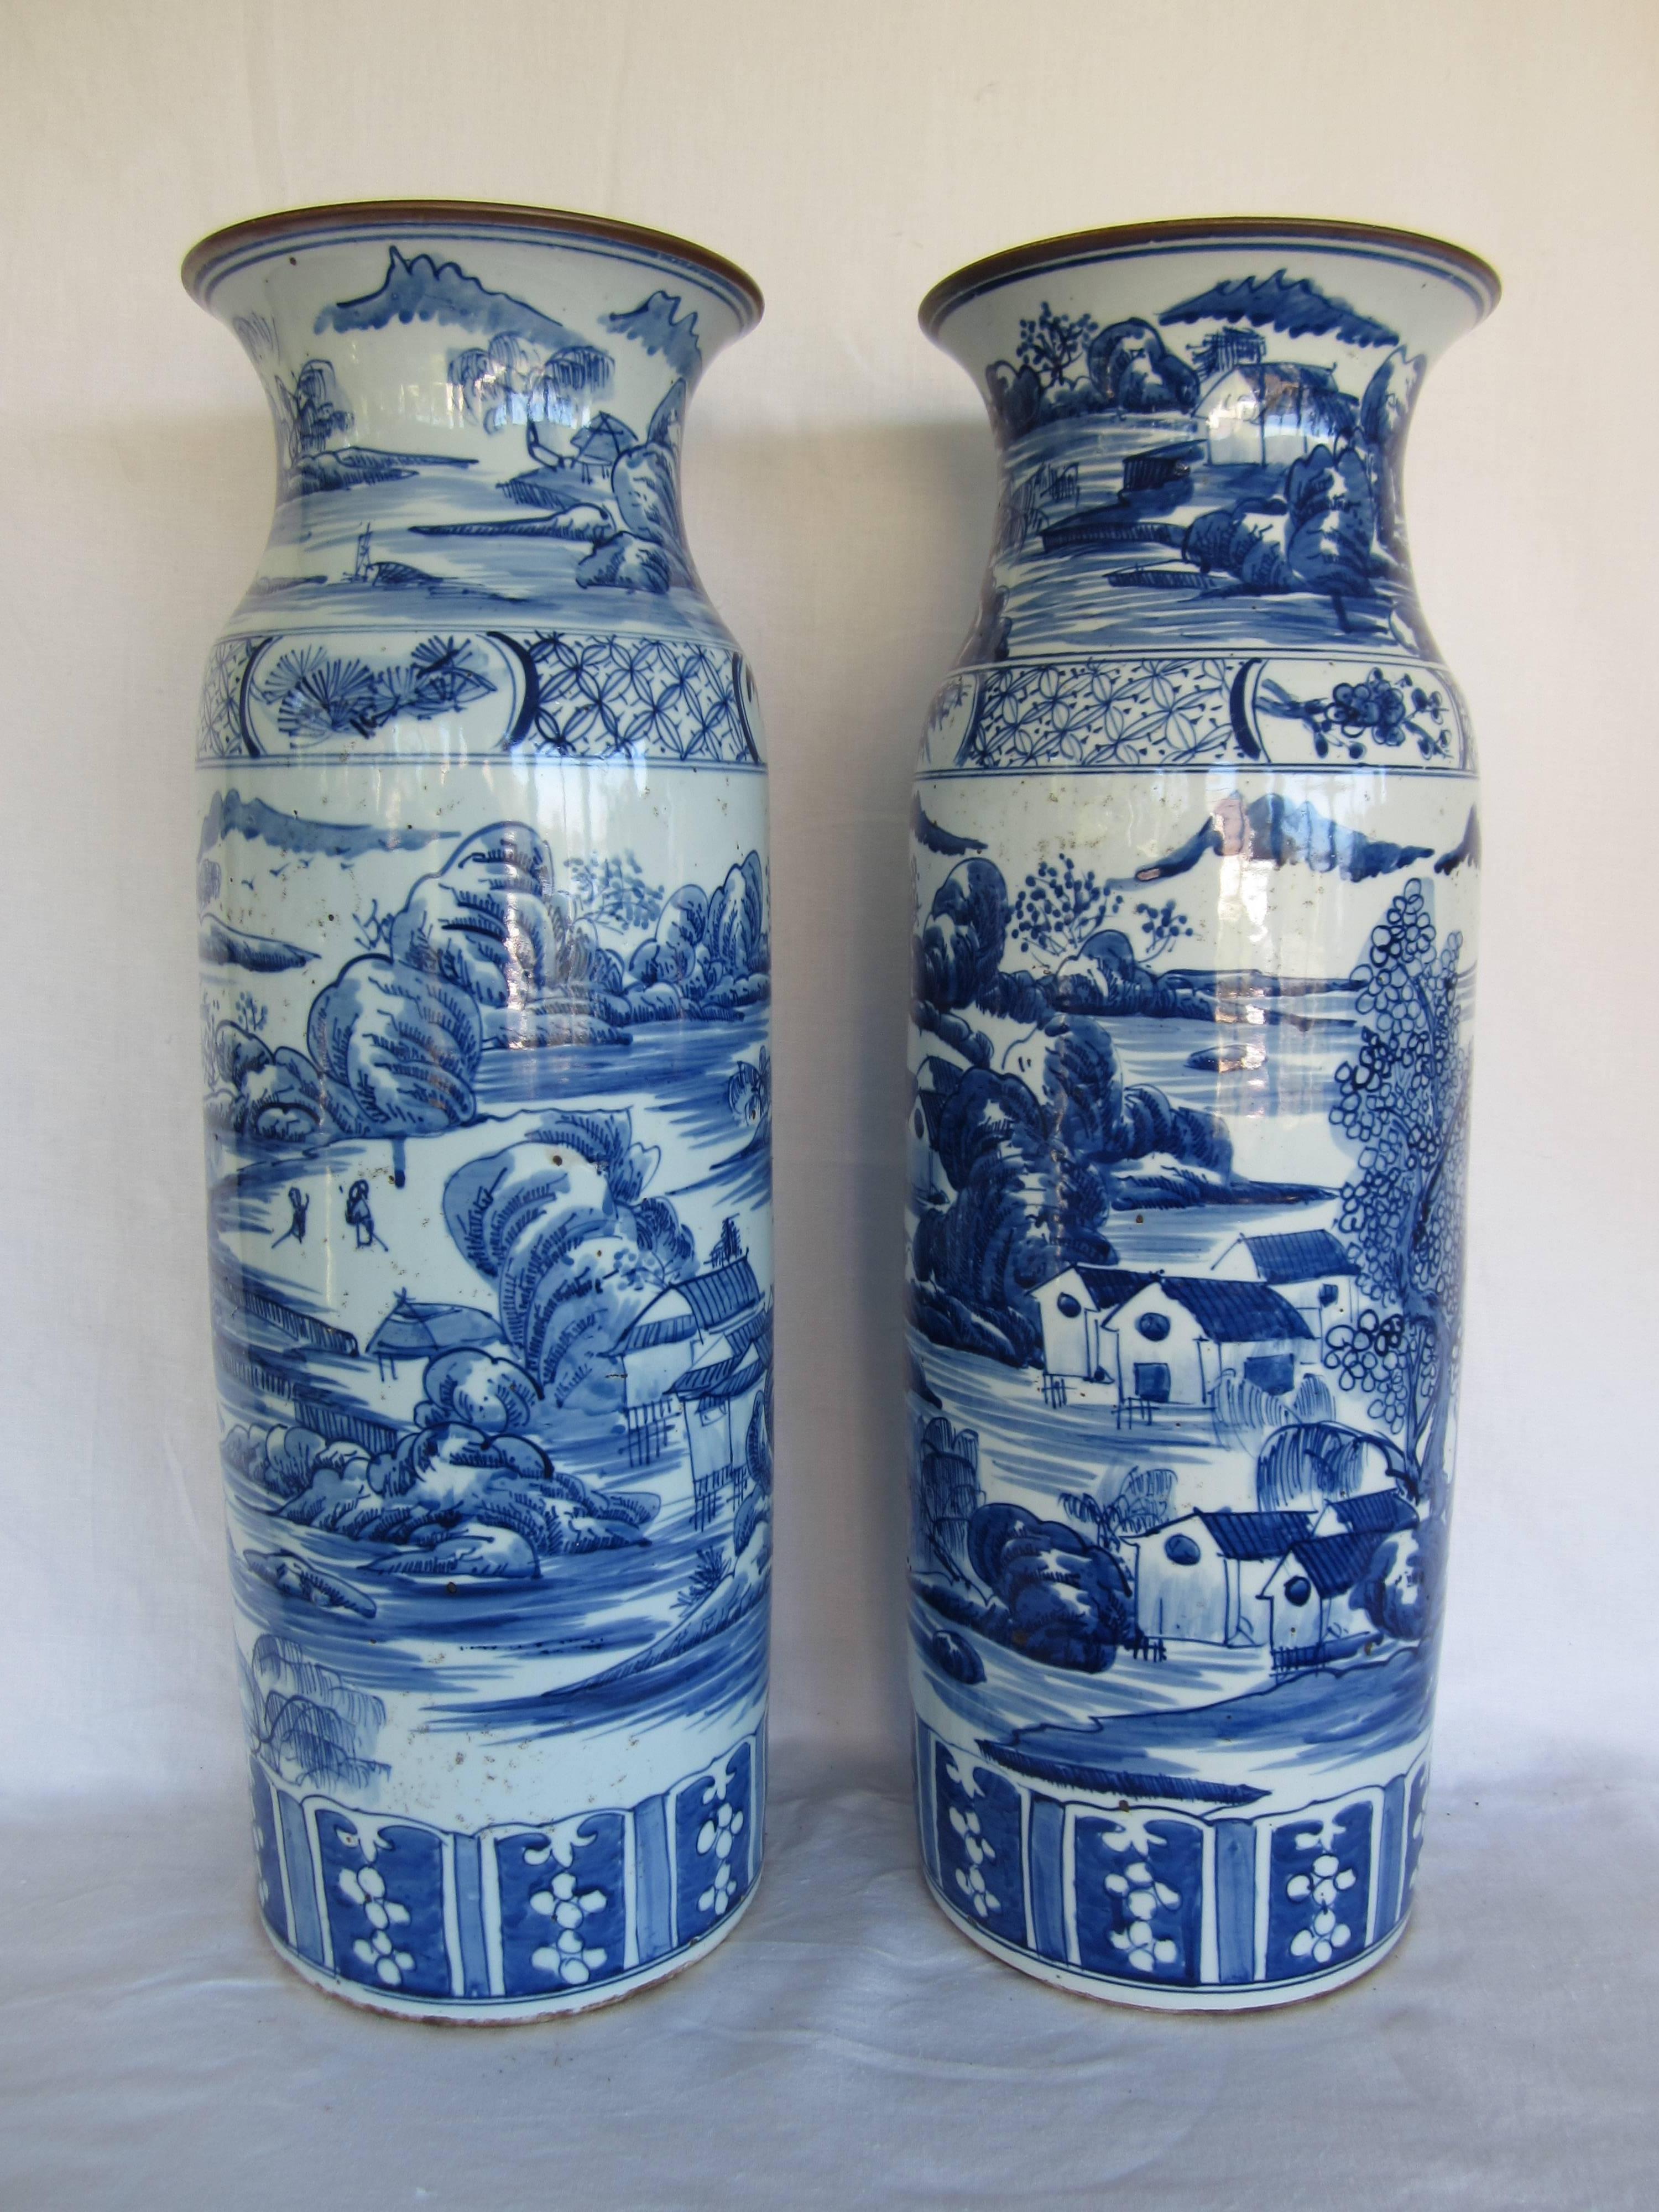 Large and impressive pair of Chinese blue and white vases.